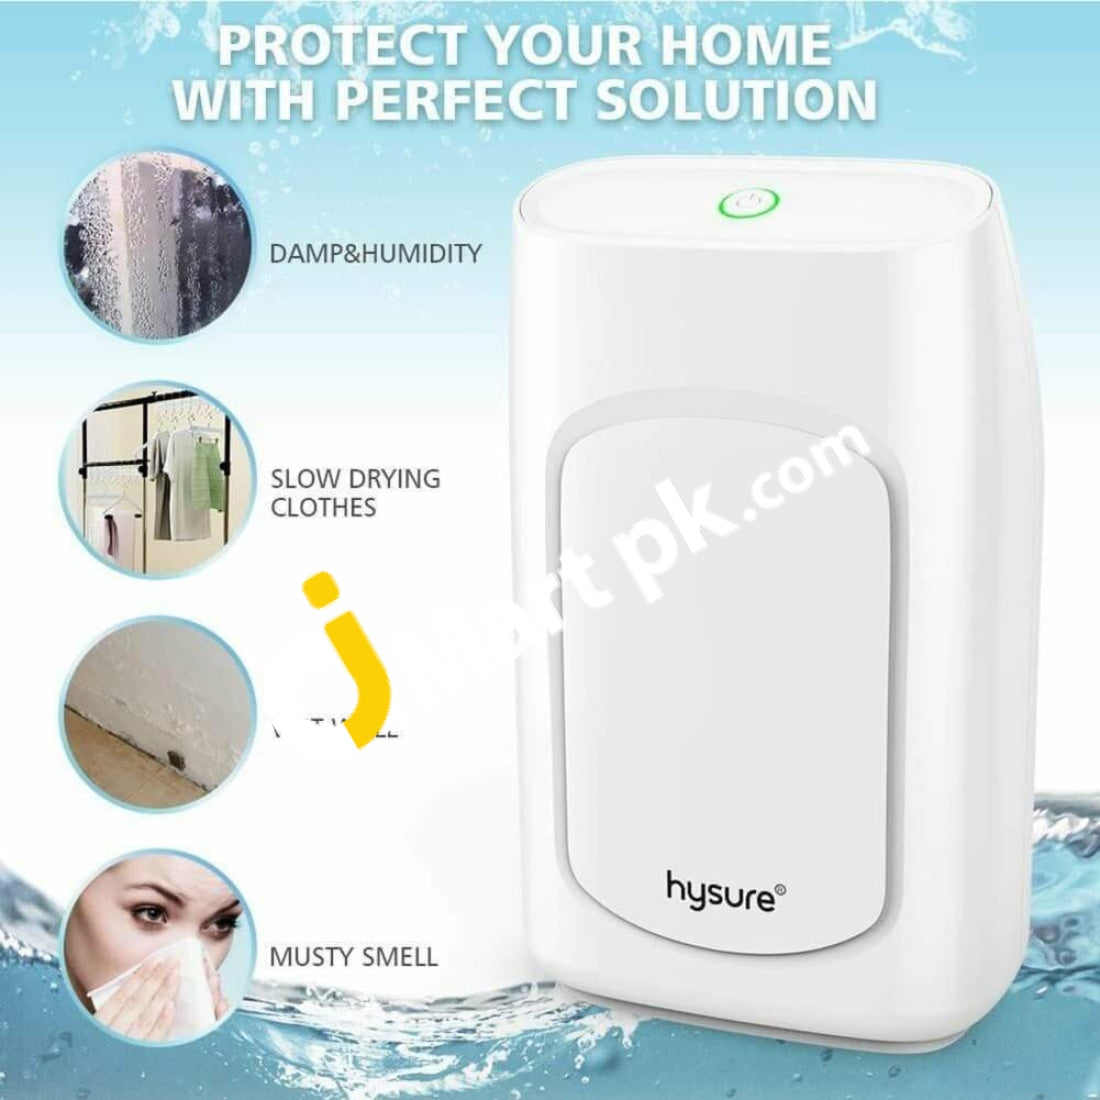 Dehumidifier Hysure 700Ml Compact Portable Ultra Quiet For Removing Damp Mold Moisture - Imported